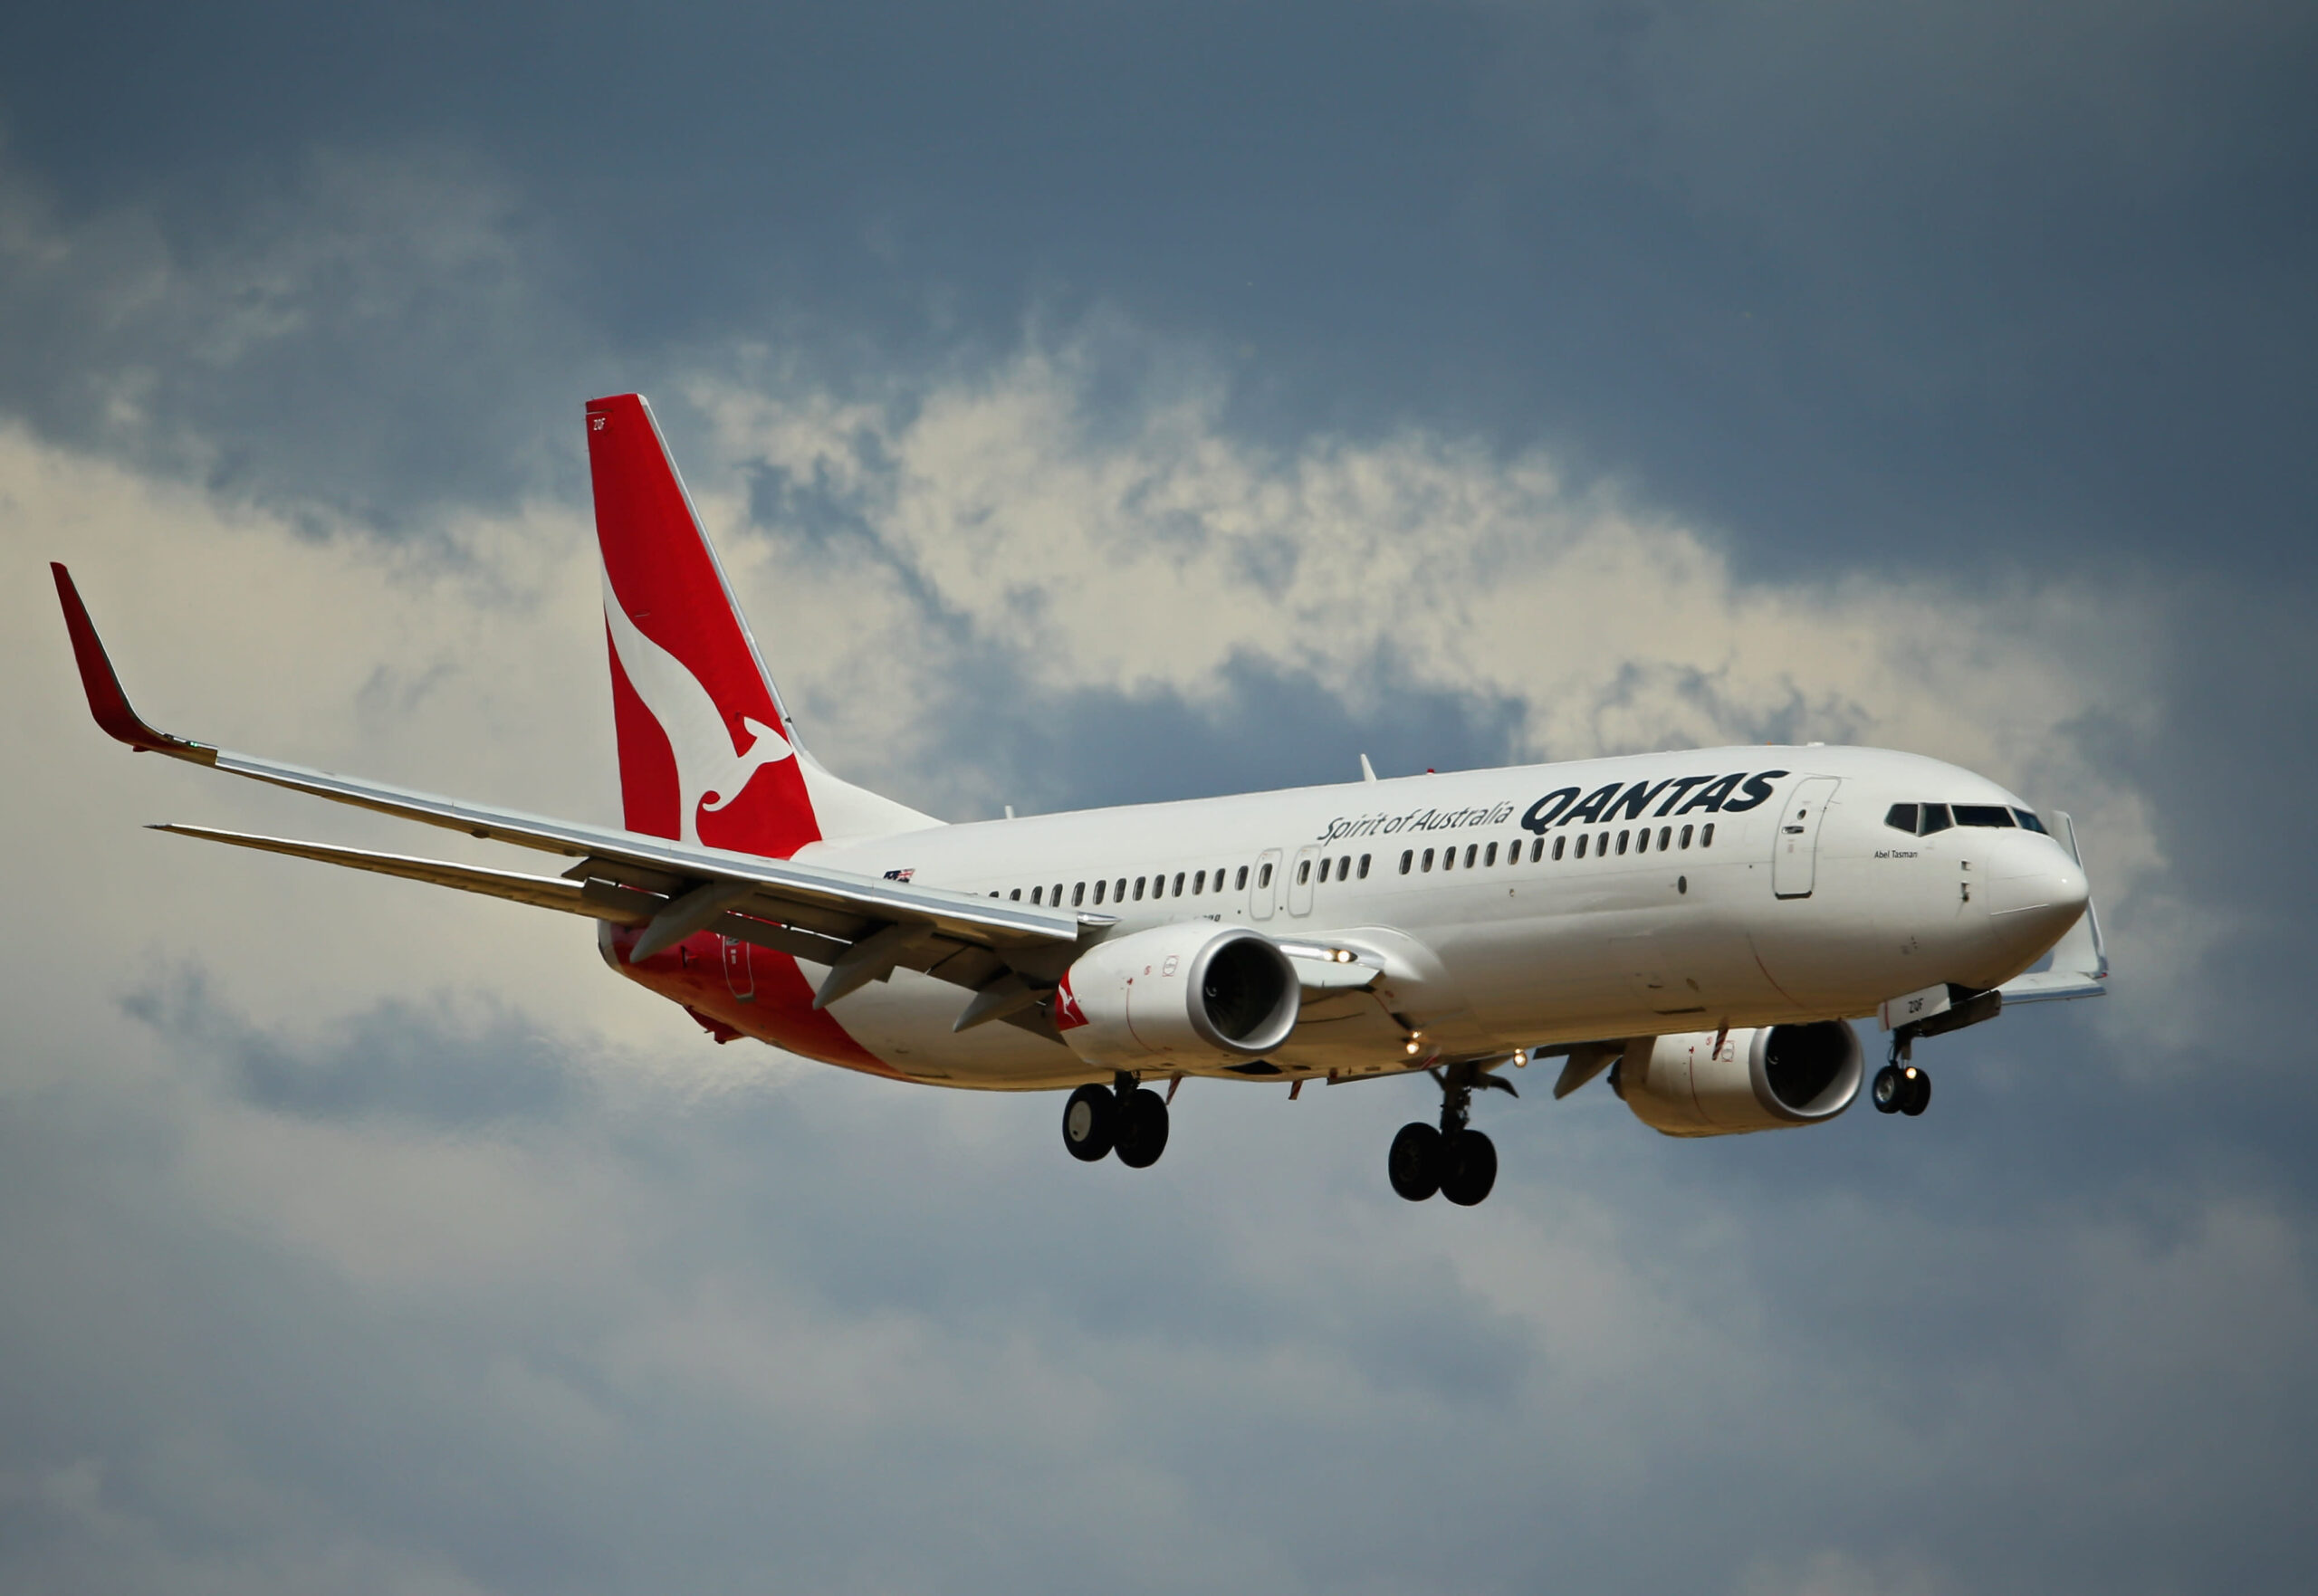 Qantas just one of many Australian big businesses placing profit over people